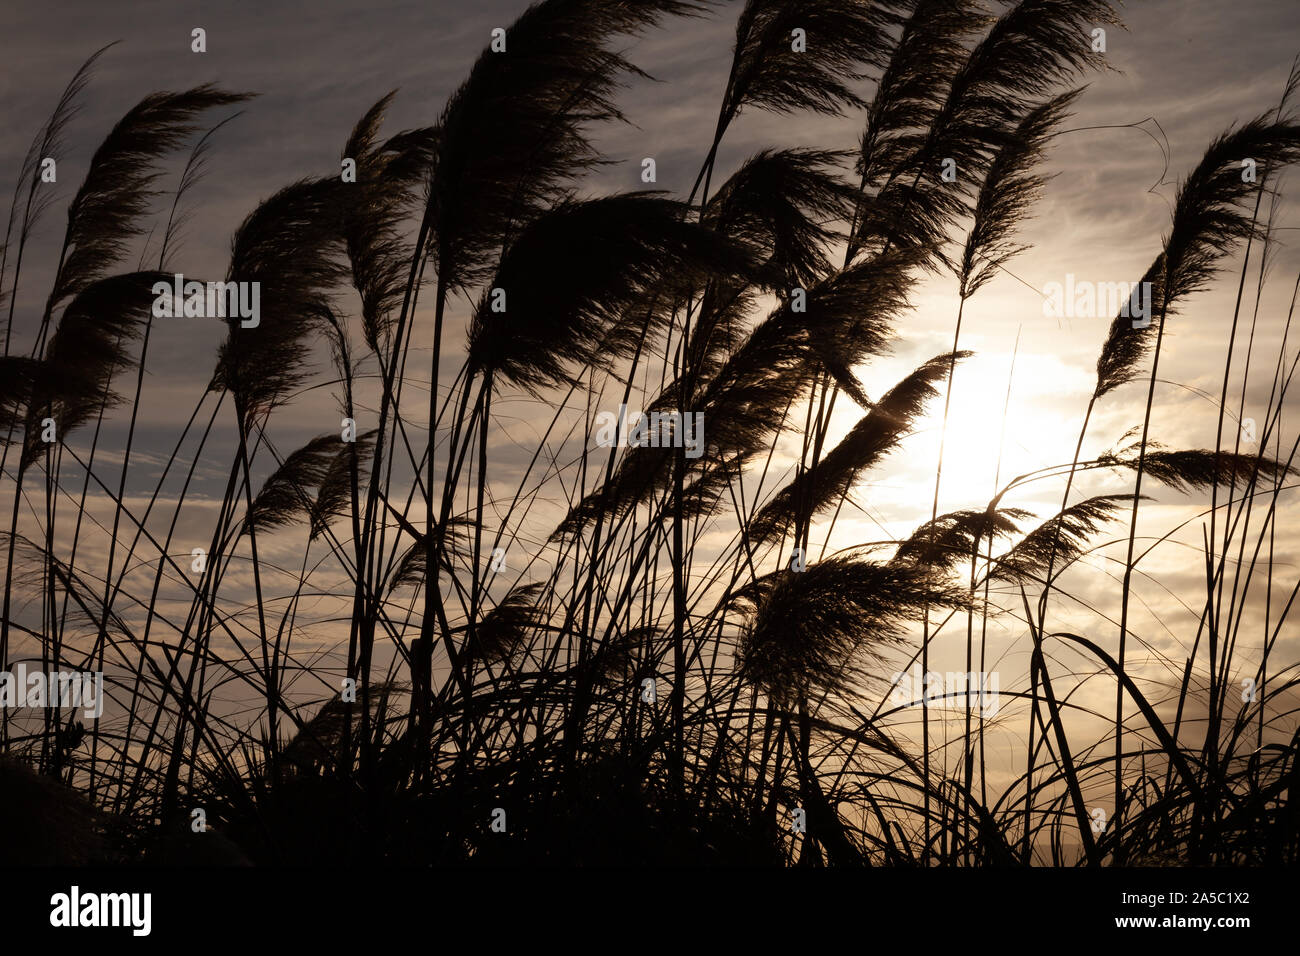 Reeds moving in the wind against the evening sun Stock Photo